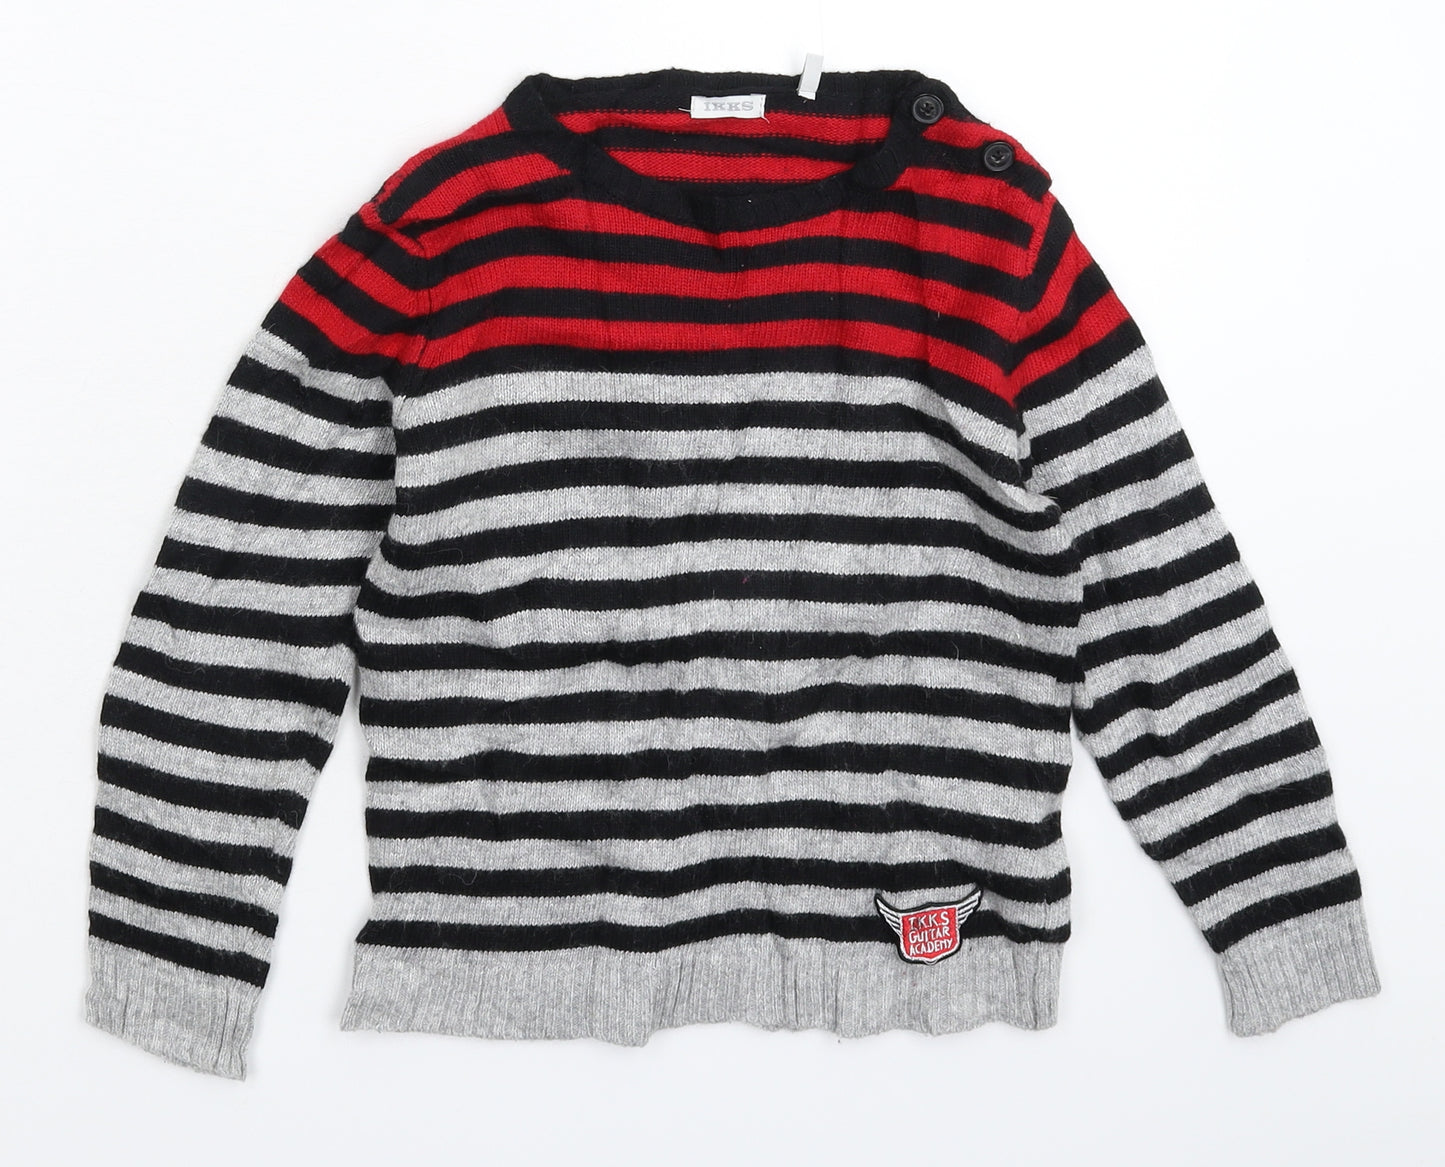 IKKS Boys Multicoloured Striped Knit Pullover Jumper Size 6 Years